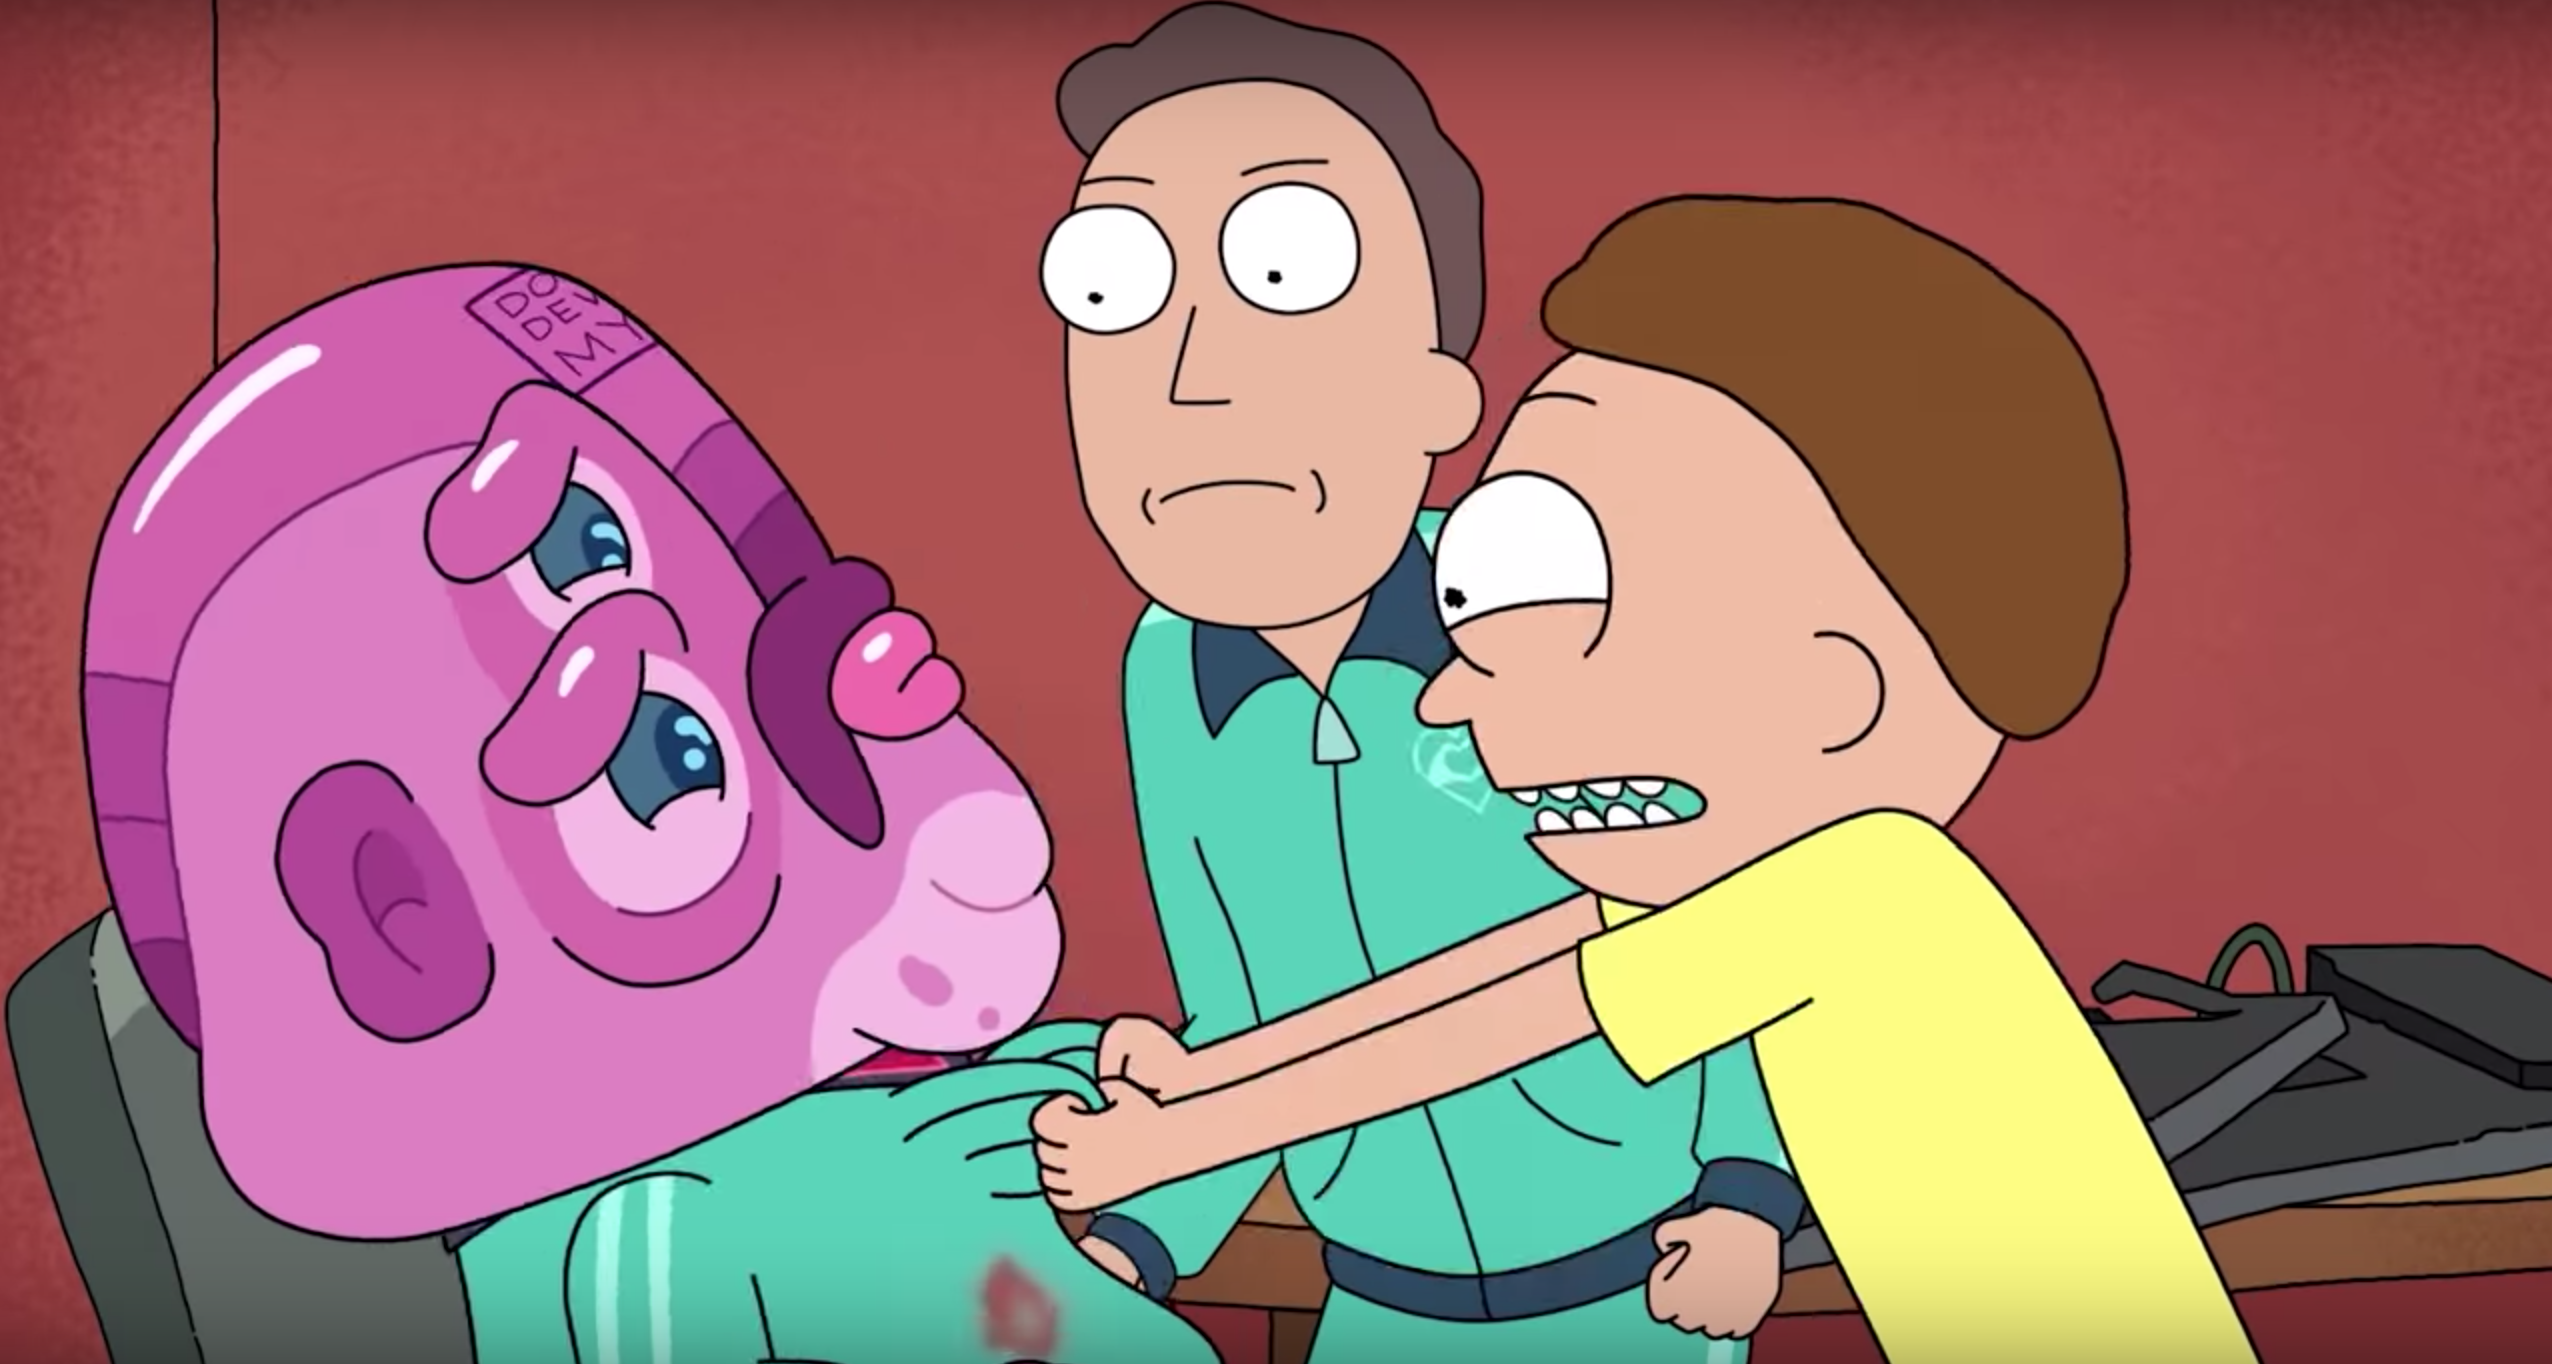 Rick And Morty Trolled Its Fans Again In Season 4